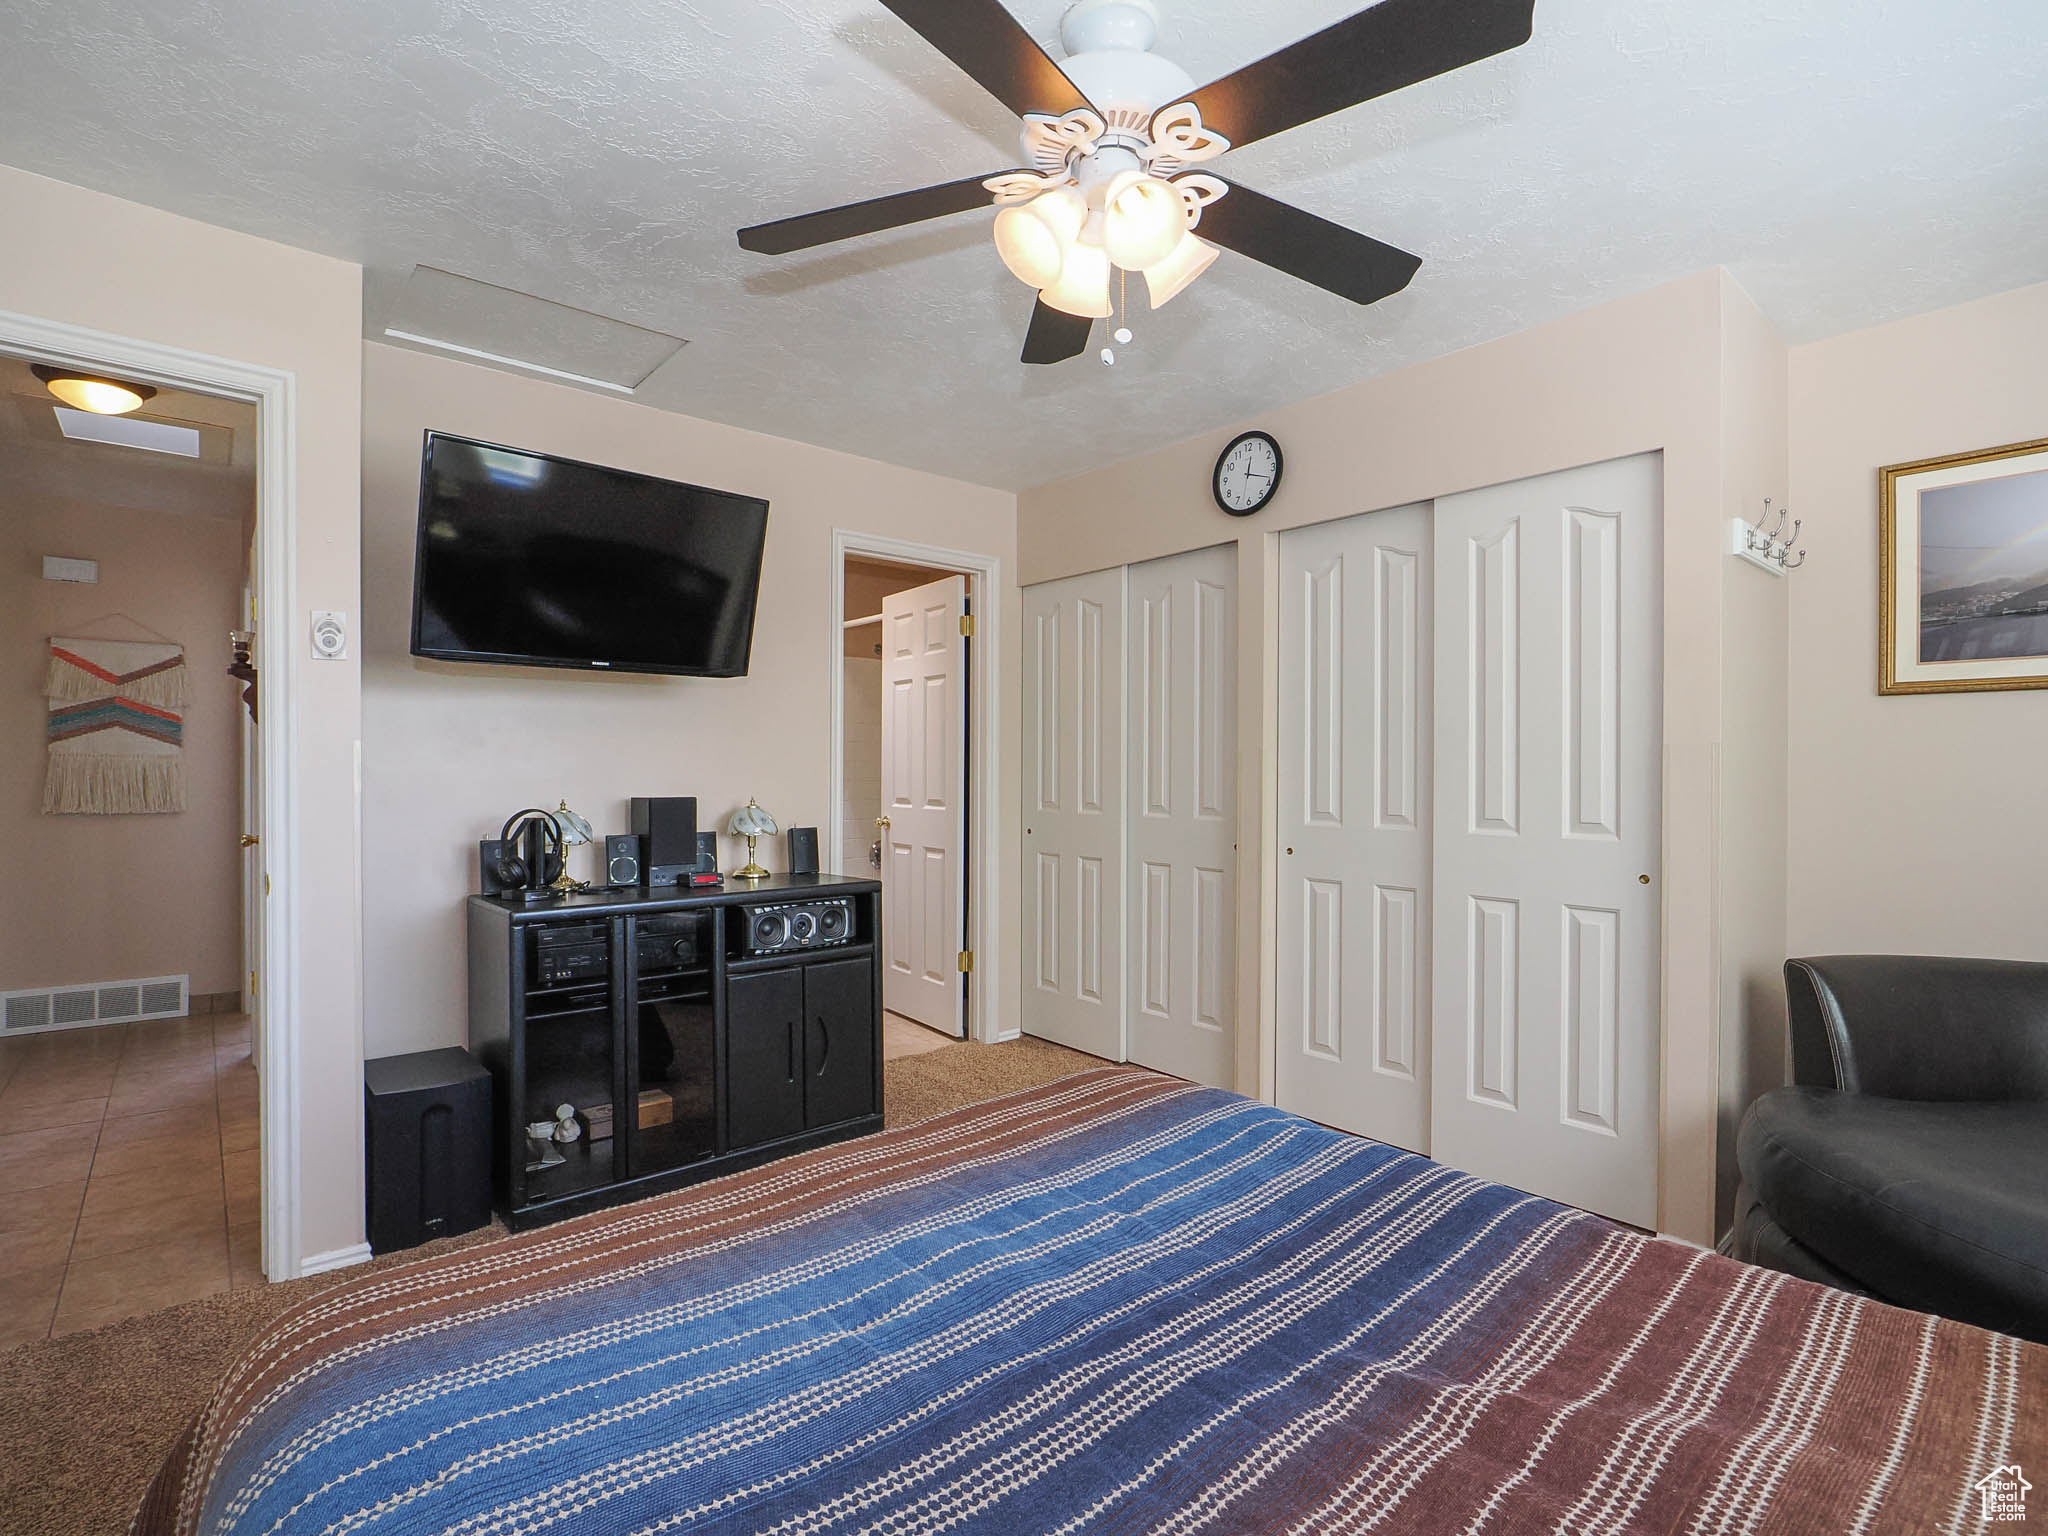 Tiled bedroom with ceiling fan